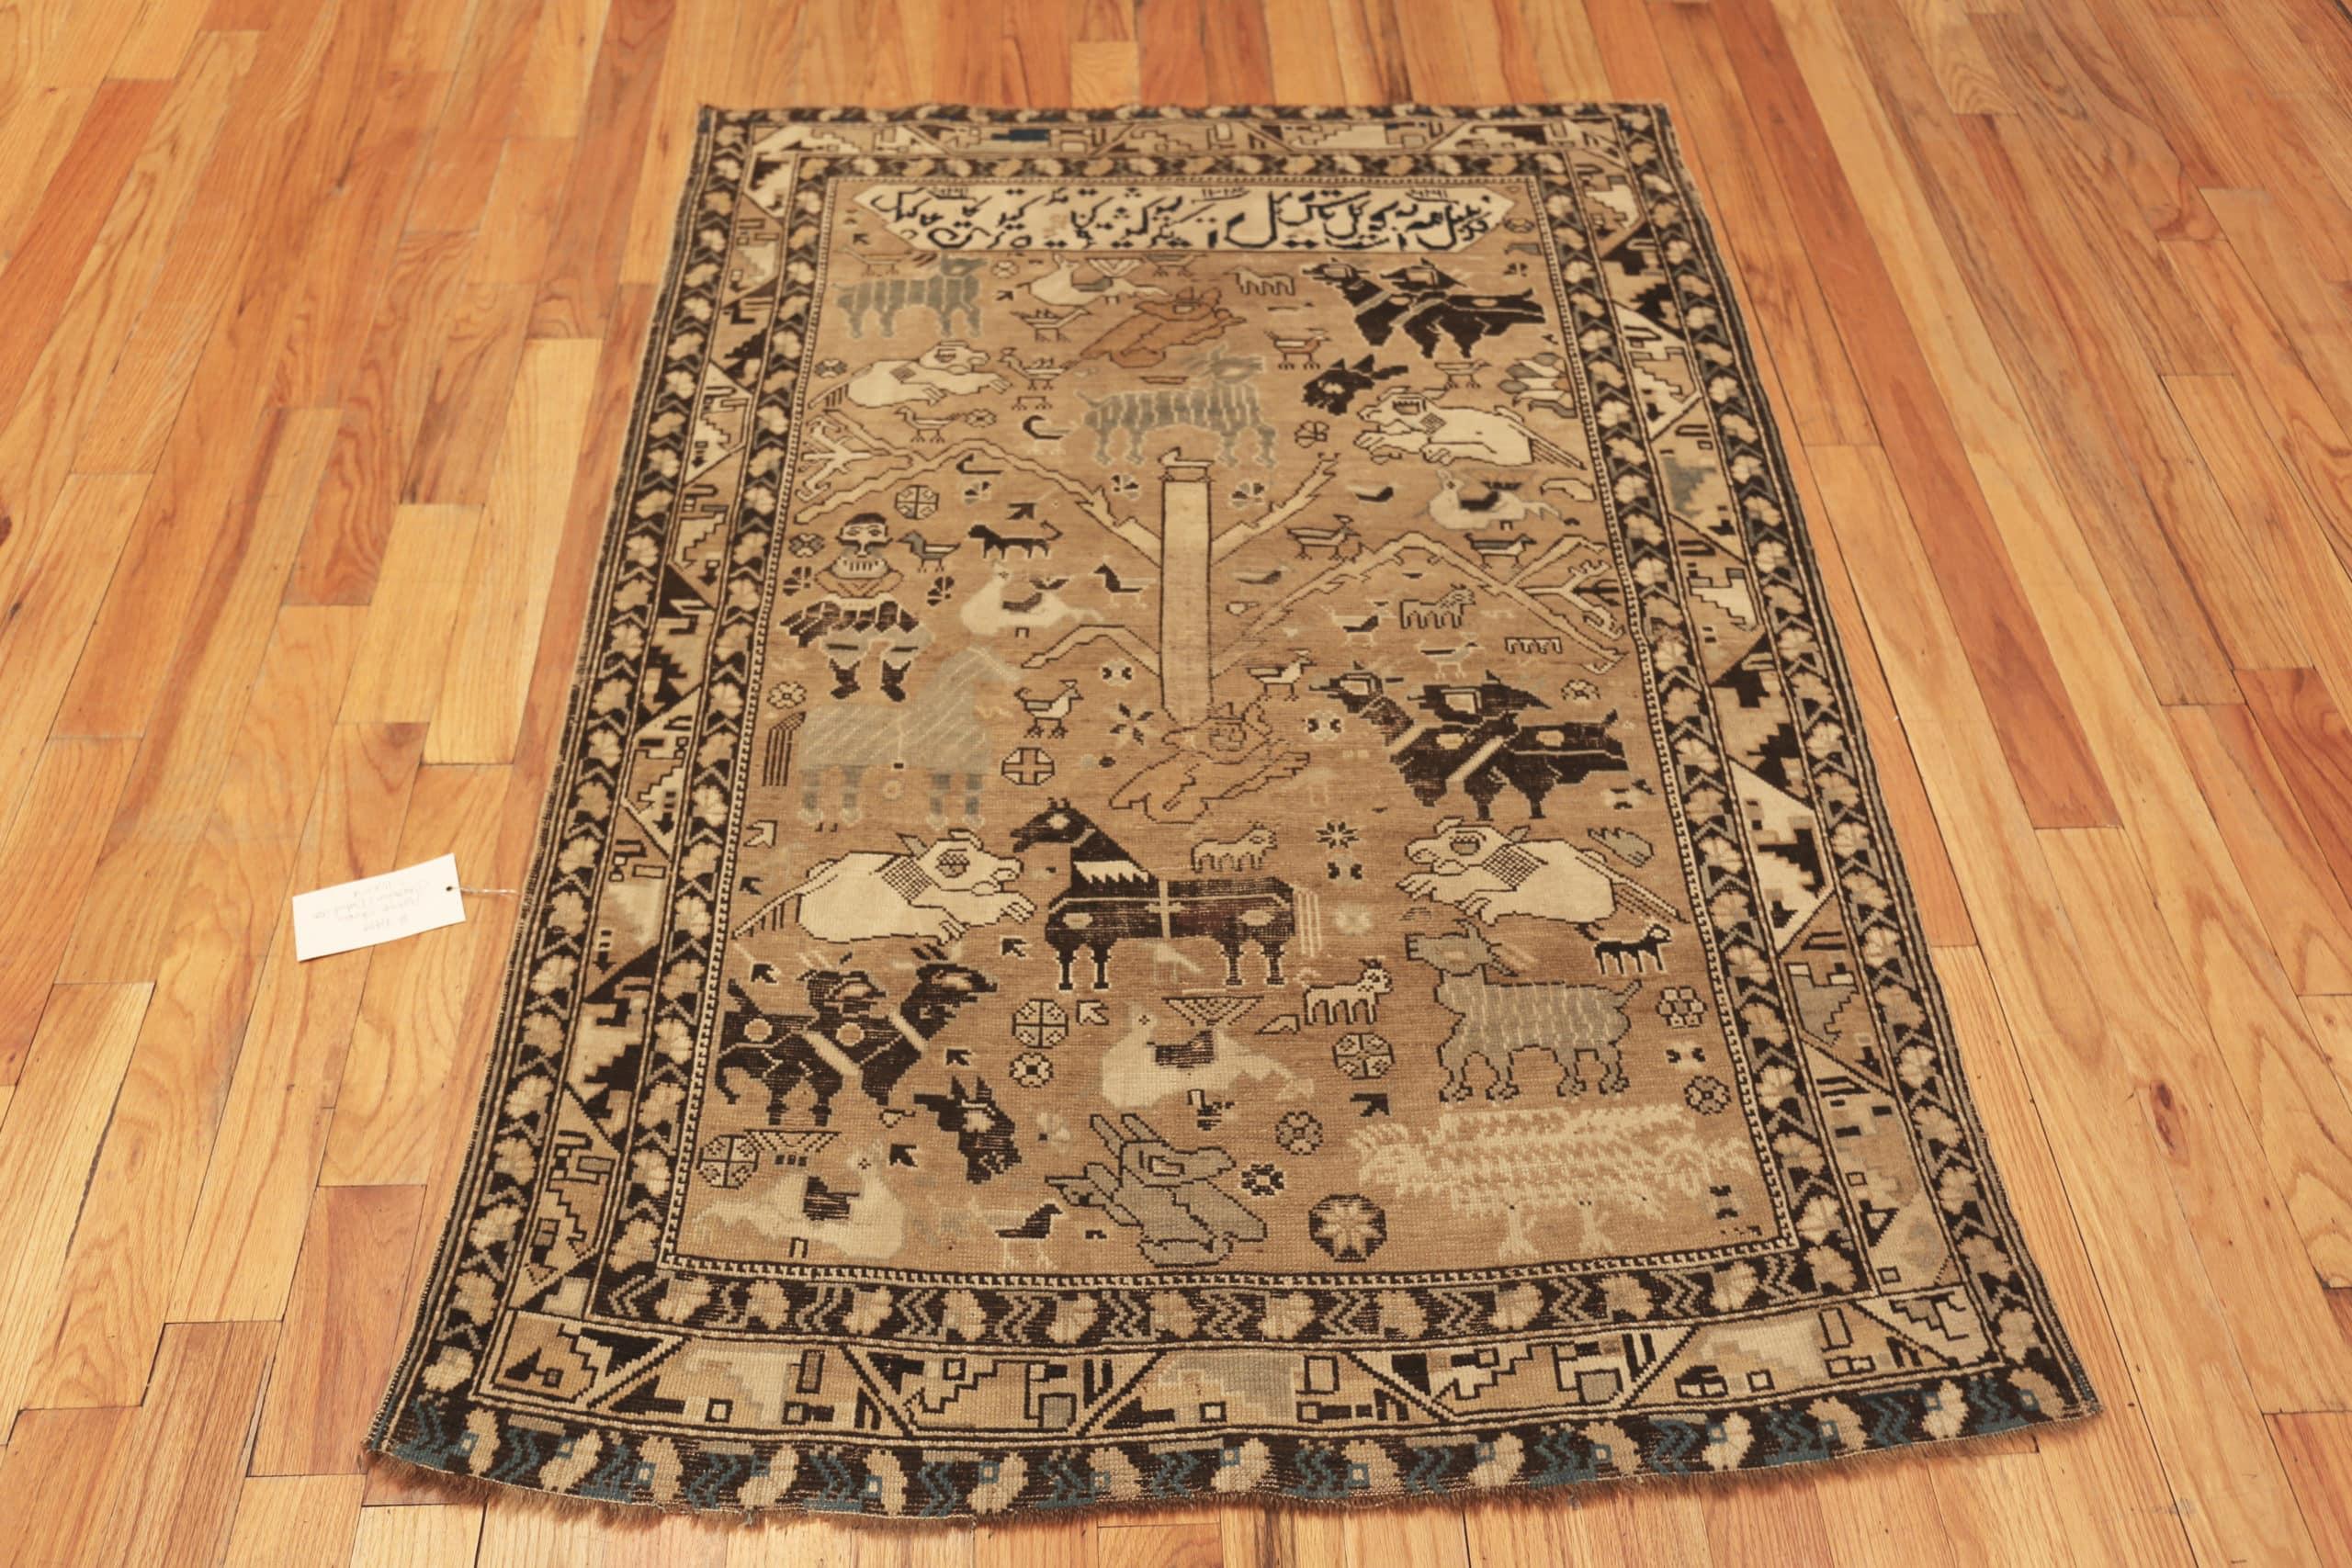 Collectible Antique Caucasian Shirvan Rug Dated 1214 (1800) 3'10